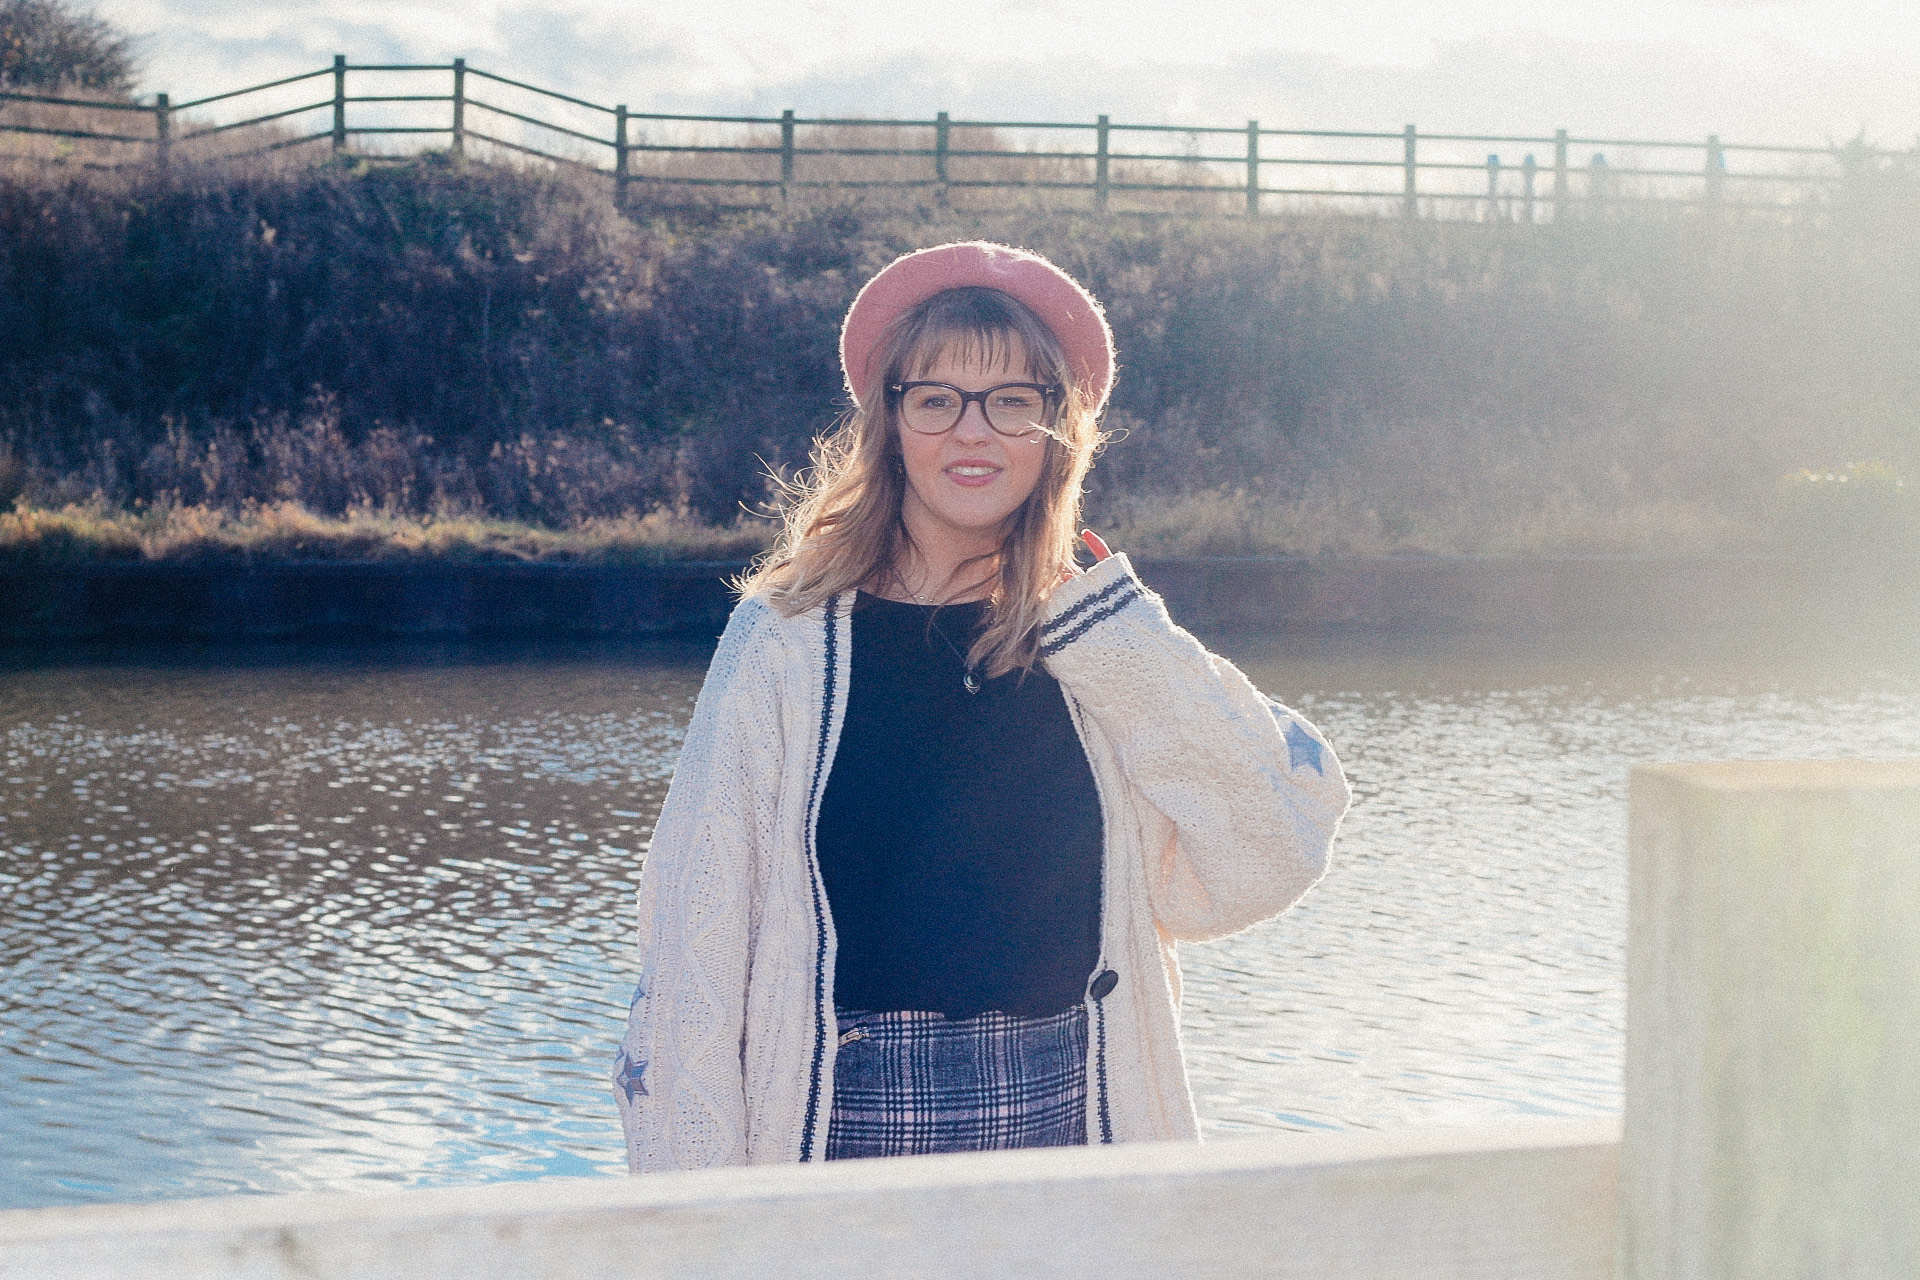 How to improve your wellbeing - little mental tips blogpost. Blogger girl chloe harriets in pink beret.